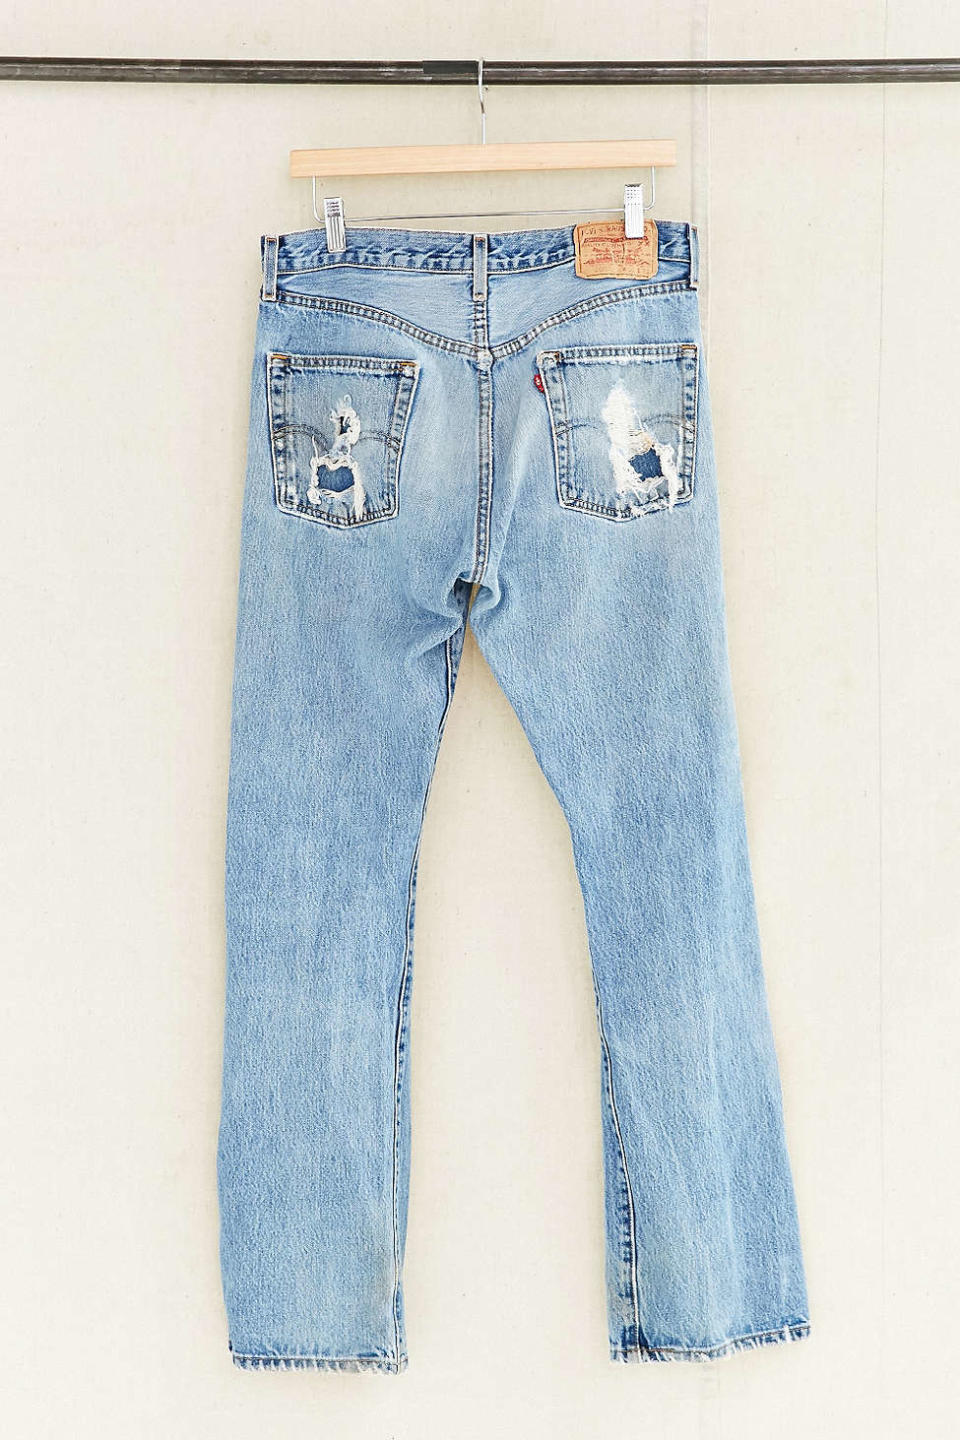 Urban Outfitters carries a small selection of Vintage Levi’s.